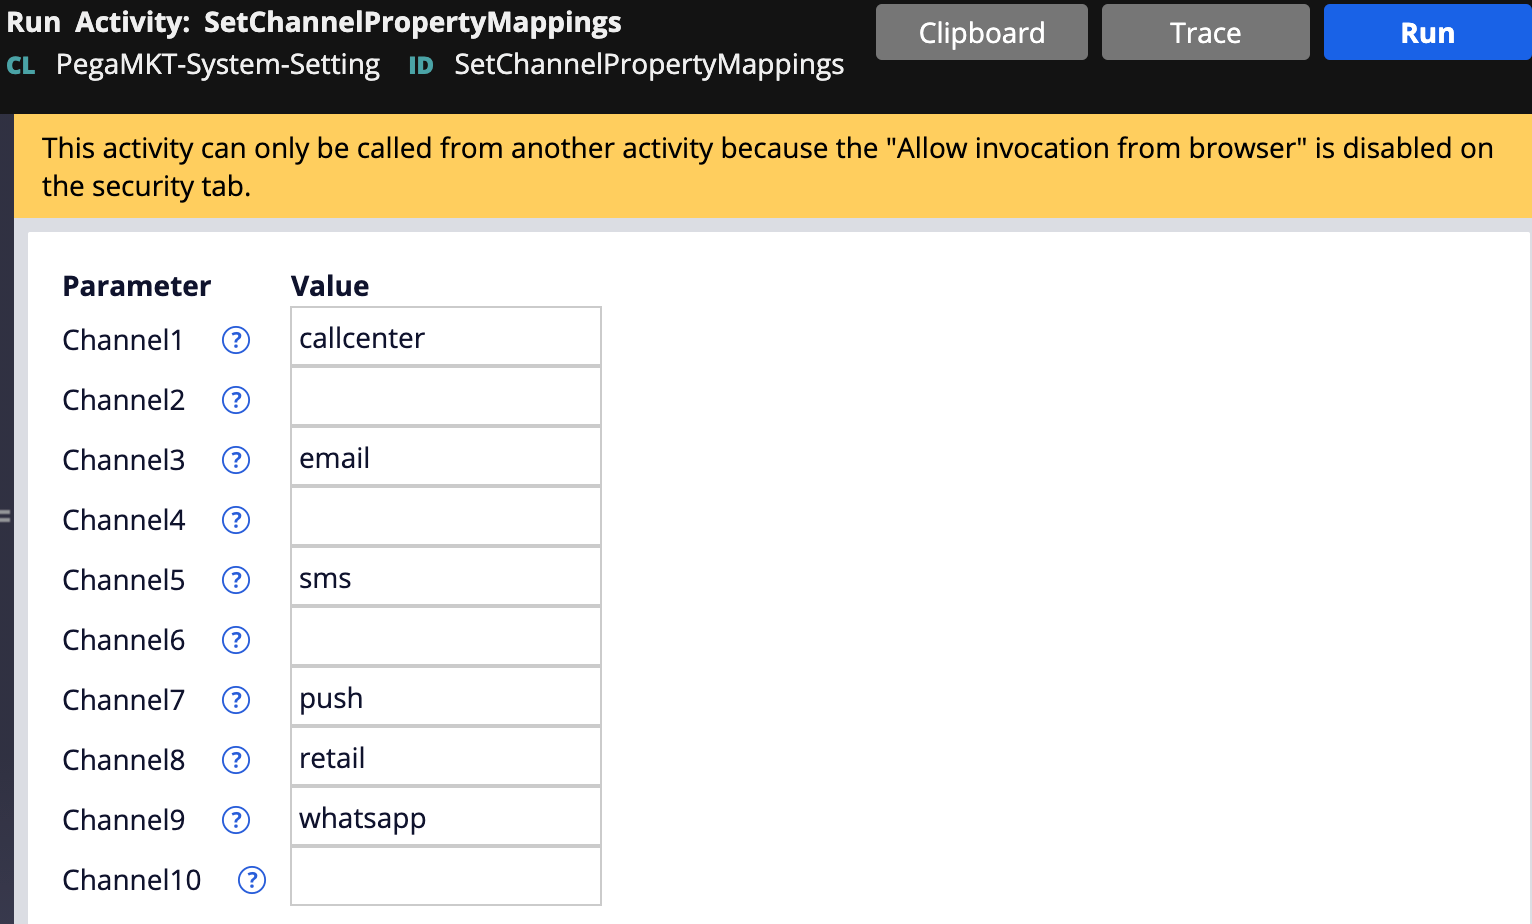 Running the SetChannelPropertyMappings activity